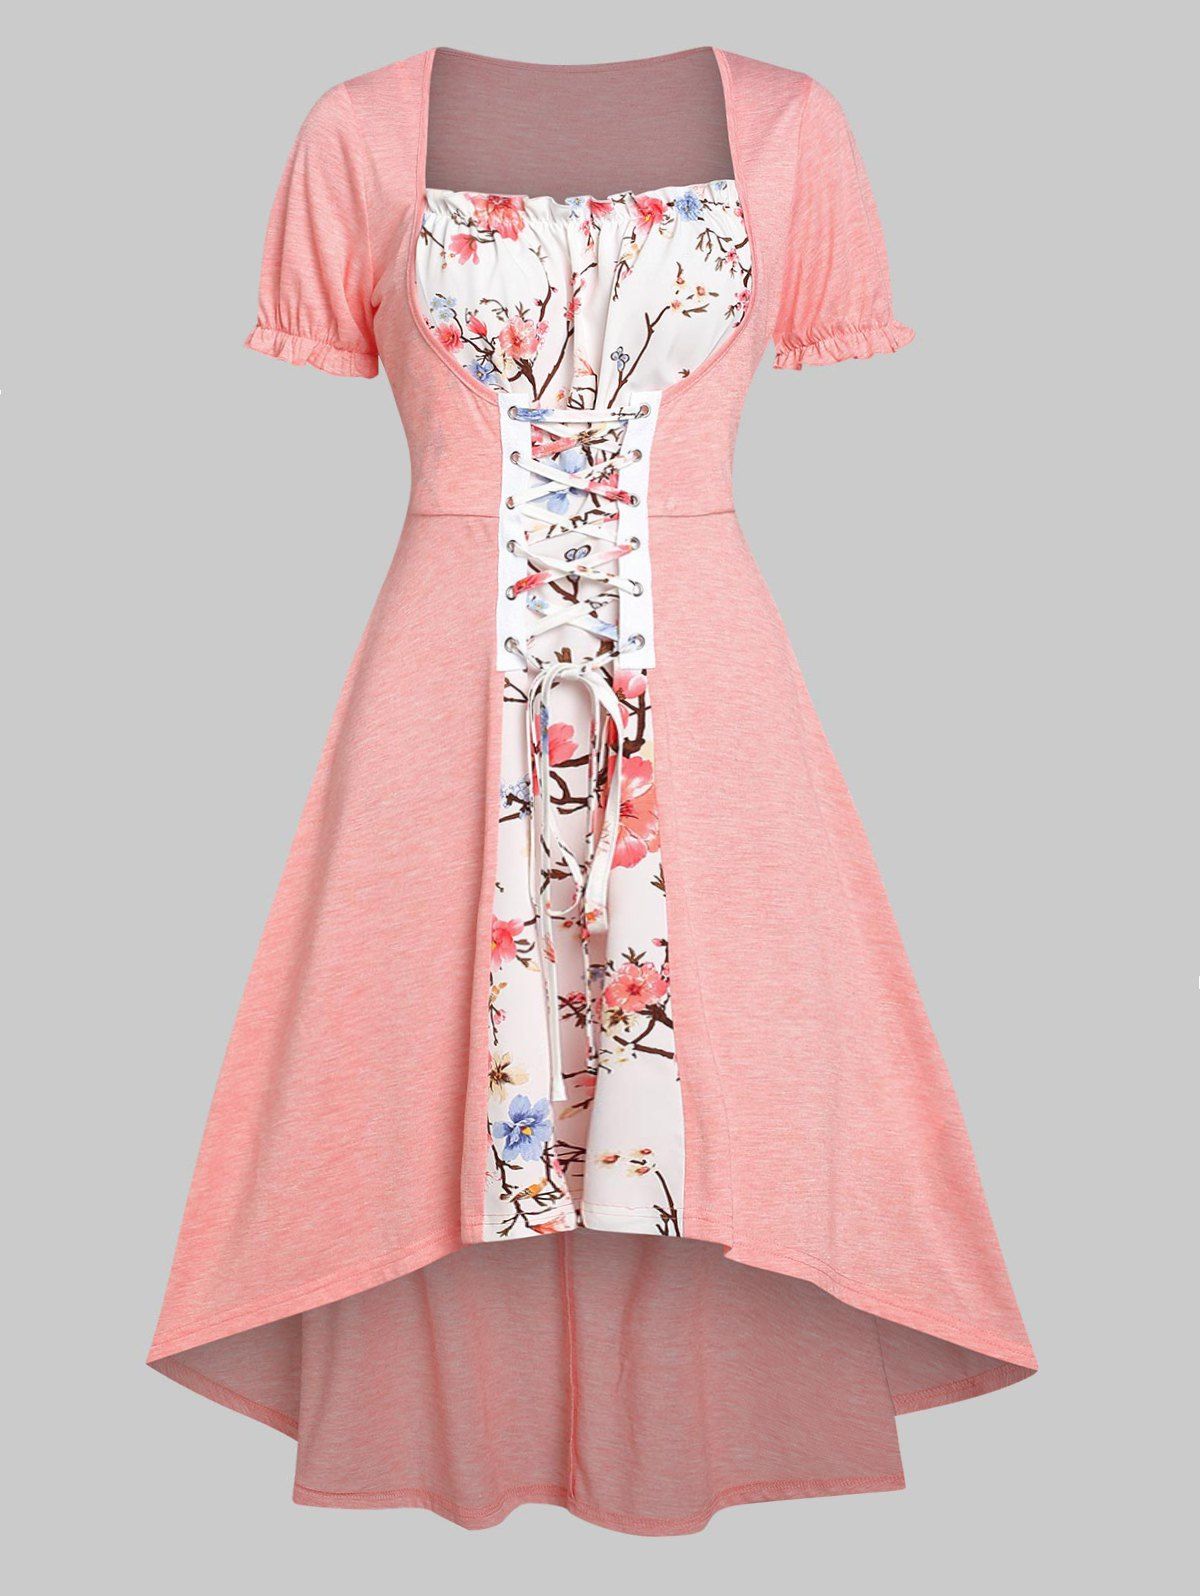 Floral Print Lace Up Faux Twinset High Low Dress - LIGHT PINK XXL